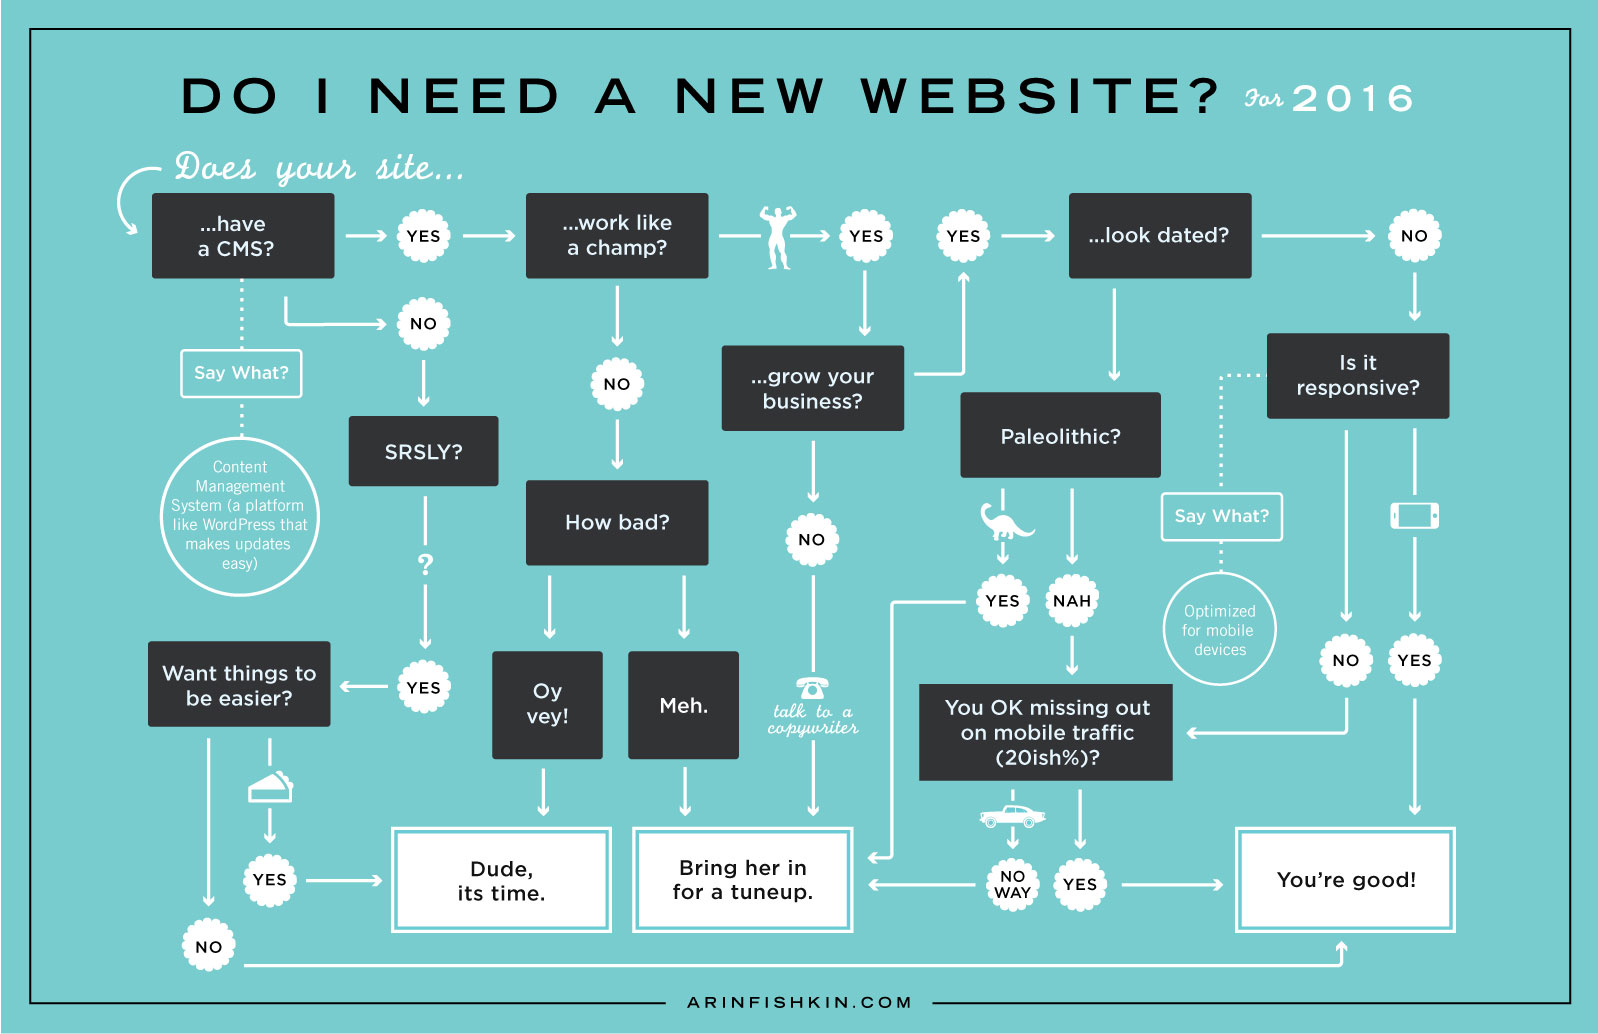 Infographic - flowchart "Do I need a new website in 2016?"